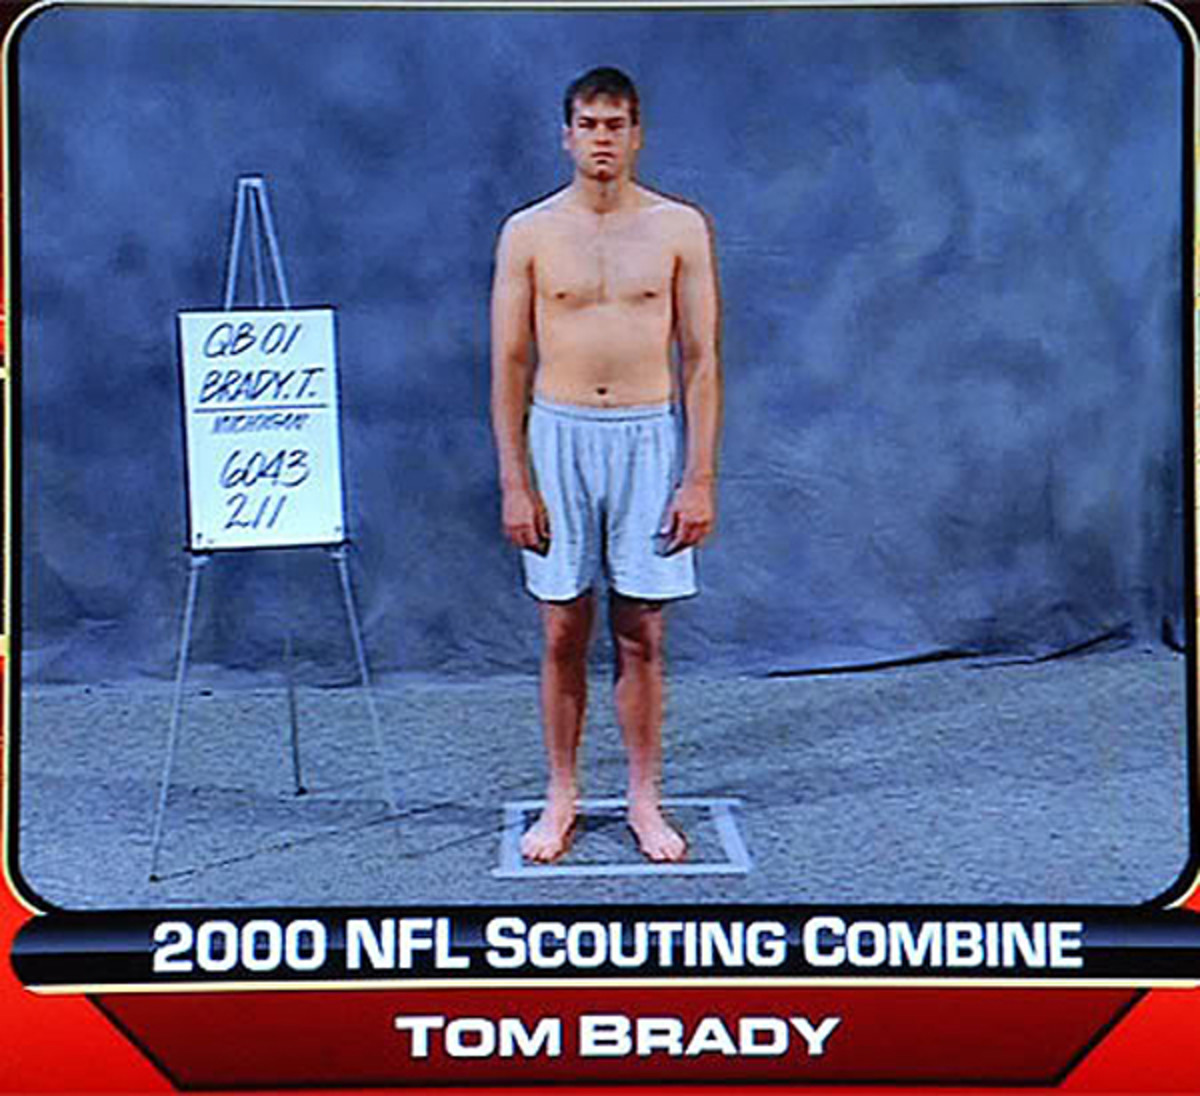 forlade makker lukker Here's A Pic Of Tom Brady Shirtless At The 2000 NFL Combine - Sports  Illustrated